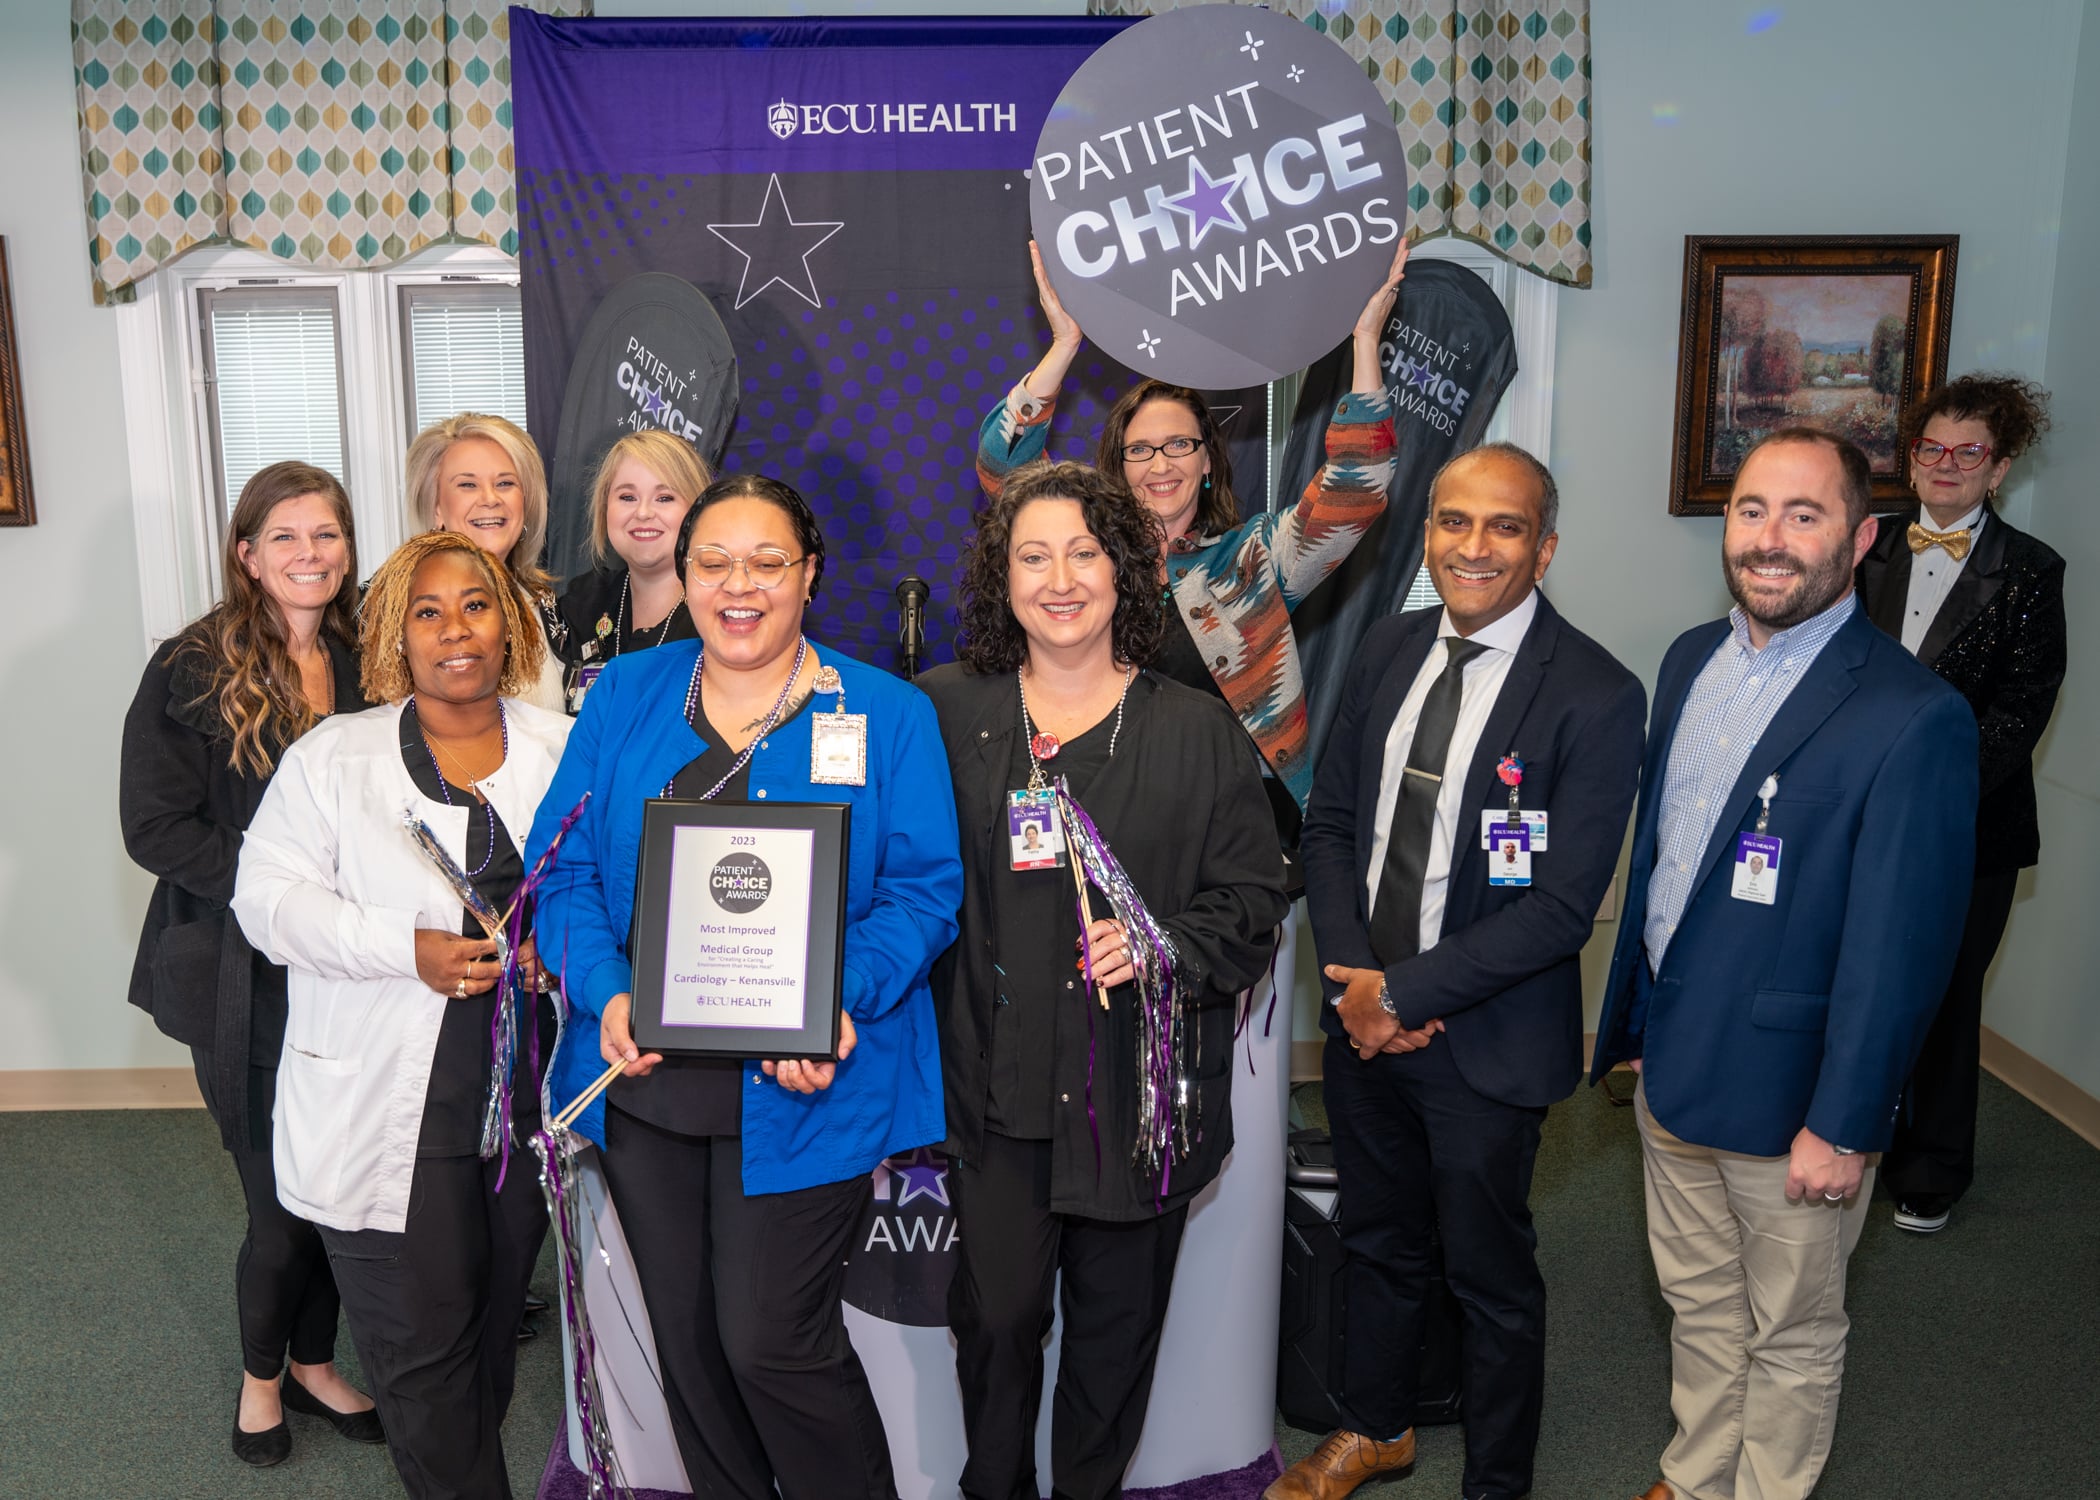 ECU Health Cardiology Kenansville team members get together to take a photo and celebrate their achievement as a Patient Choice Award winner.